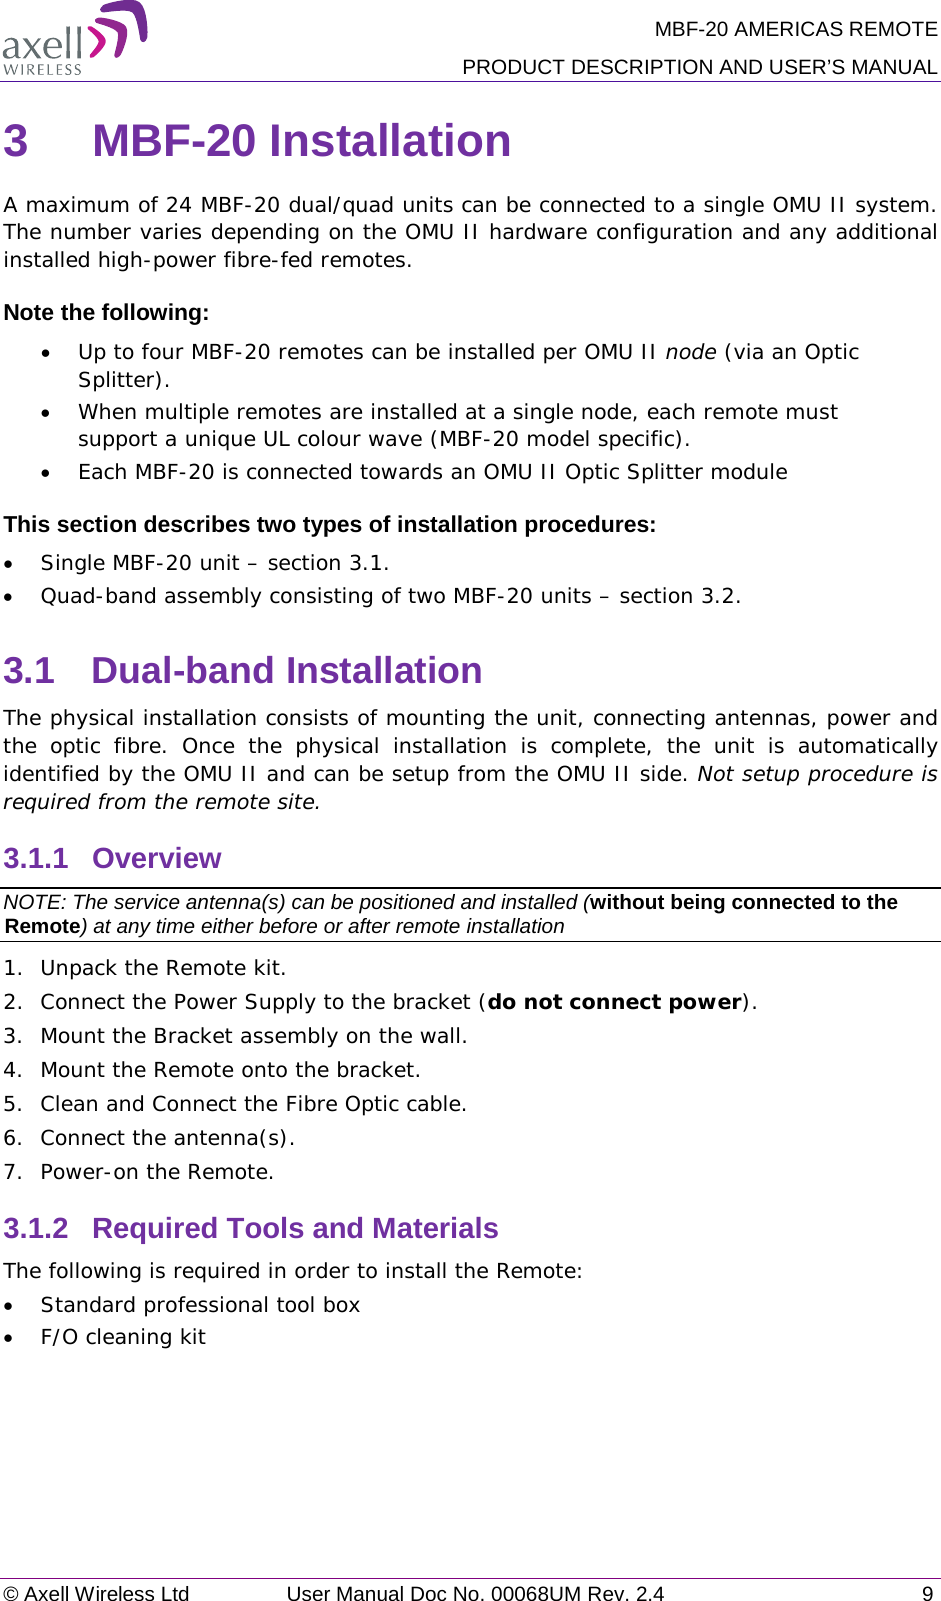 MBF-20 AMERICAS REMOTE PRODUCT DESCRIPTION AND USER’S MANUAL © Axell Wireless Ltd User Manual Doc No. 00068UM Rev. 2.4  9  3  MBF-20 Installation  A maximum of 24 MBF-20 dual/quad units can be connected to a single OMU II system. The number varies depending on the OMU II hardware configuration and any additional installed high-power fibre-fed remotes.  Note the following: • Up to four MBF-20 remotes can be installed per OMU II node (via an Optic Splitter).  • When multiple remotes are installed at a single node, each remote must support a unique UL colour wave (MBF-20 model specific). • Each MBF-20 is connected towards an OMU II Optic Splitter module This section describes two types of installation procedures: • Single MBF-20 unit – section  3.1. • Quad-band assembly consisting of two MBF-20 units – section  3.2. 3.1  Dual-band Installation The physical installation consists of mounting the unit, connecting antennas, power and the optic fibre. Once the physical installation is complete, the unit is automatically identified by the OMU II and can be setup from the OMU II side. Not setup procedure is required from the remote site. 3.1.1  Overview NOTE: The service antenna(s) can be positioned and installed (without being connected to the Remote) at any time either before or after remote installation 1.  Unpack the Remote kit. 2.  Connect the Power Supply to the bracket (do not connect power). 3.  Mount the Bracket assembly on the wall. 4.  Mount the Remote onto the bracket. 5.  Clean and Connect the Fibre Optic cable. 6.  Connect the antenna(s). 7.  Power-on the Remote. 3.1.2  Required Tools and Materials The following is required in order to install the Remote: • Standard professional tool box • F/O cleaning kit    